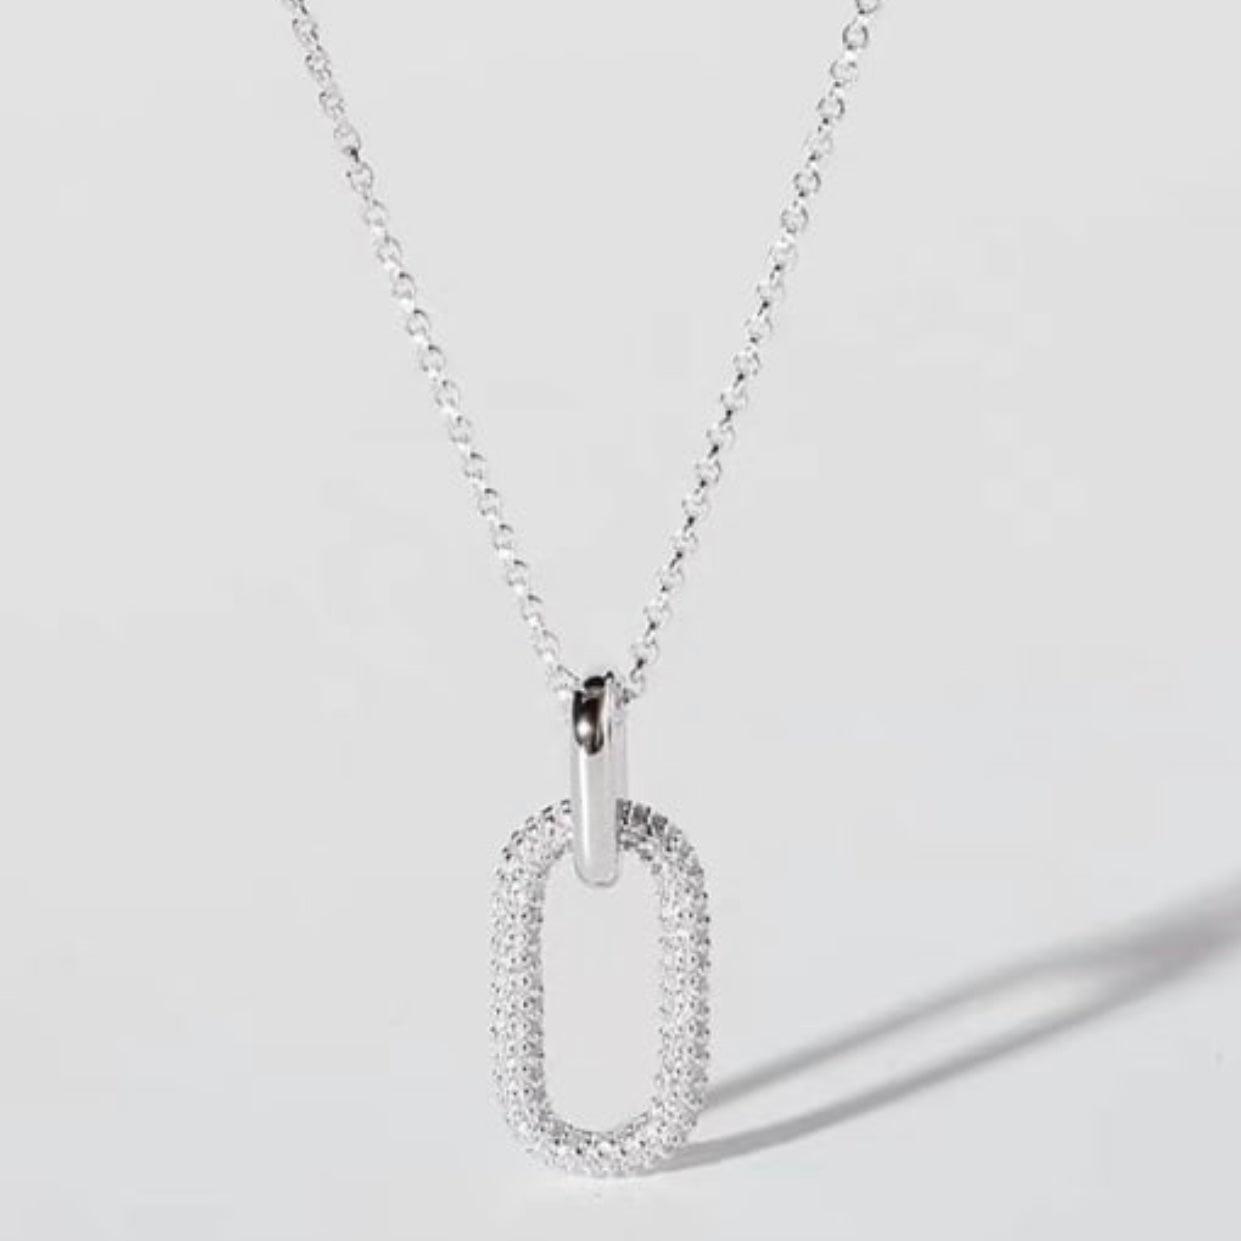 GINEVRA STERLING SILVER RECTANGLE PENDENT NECKLACE